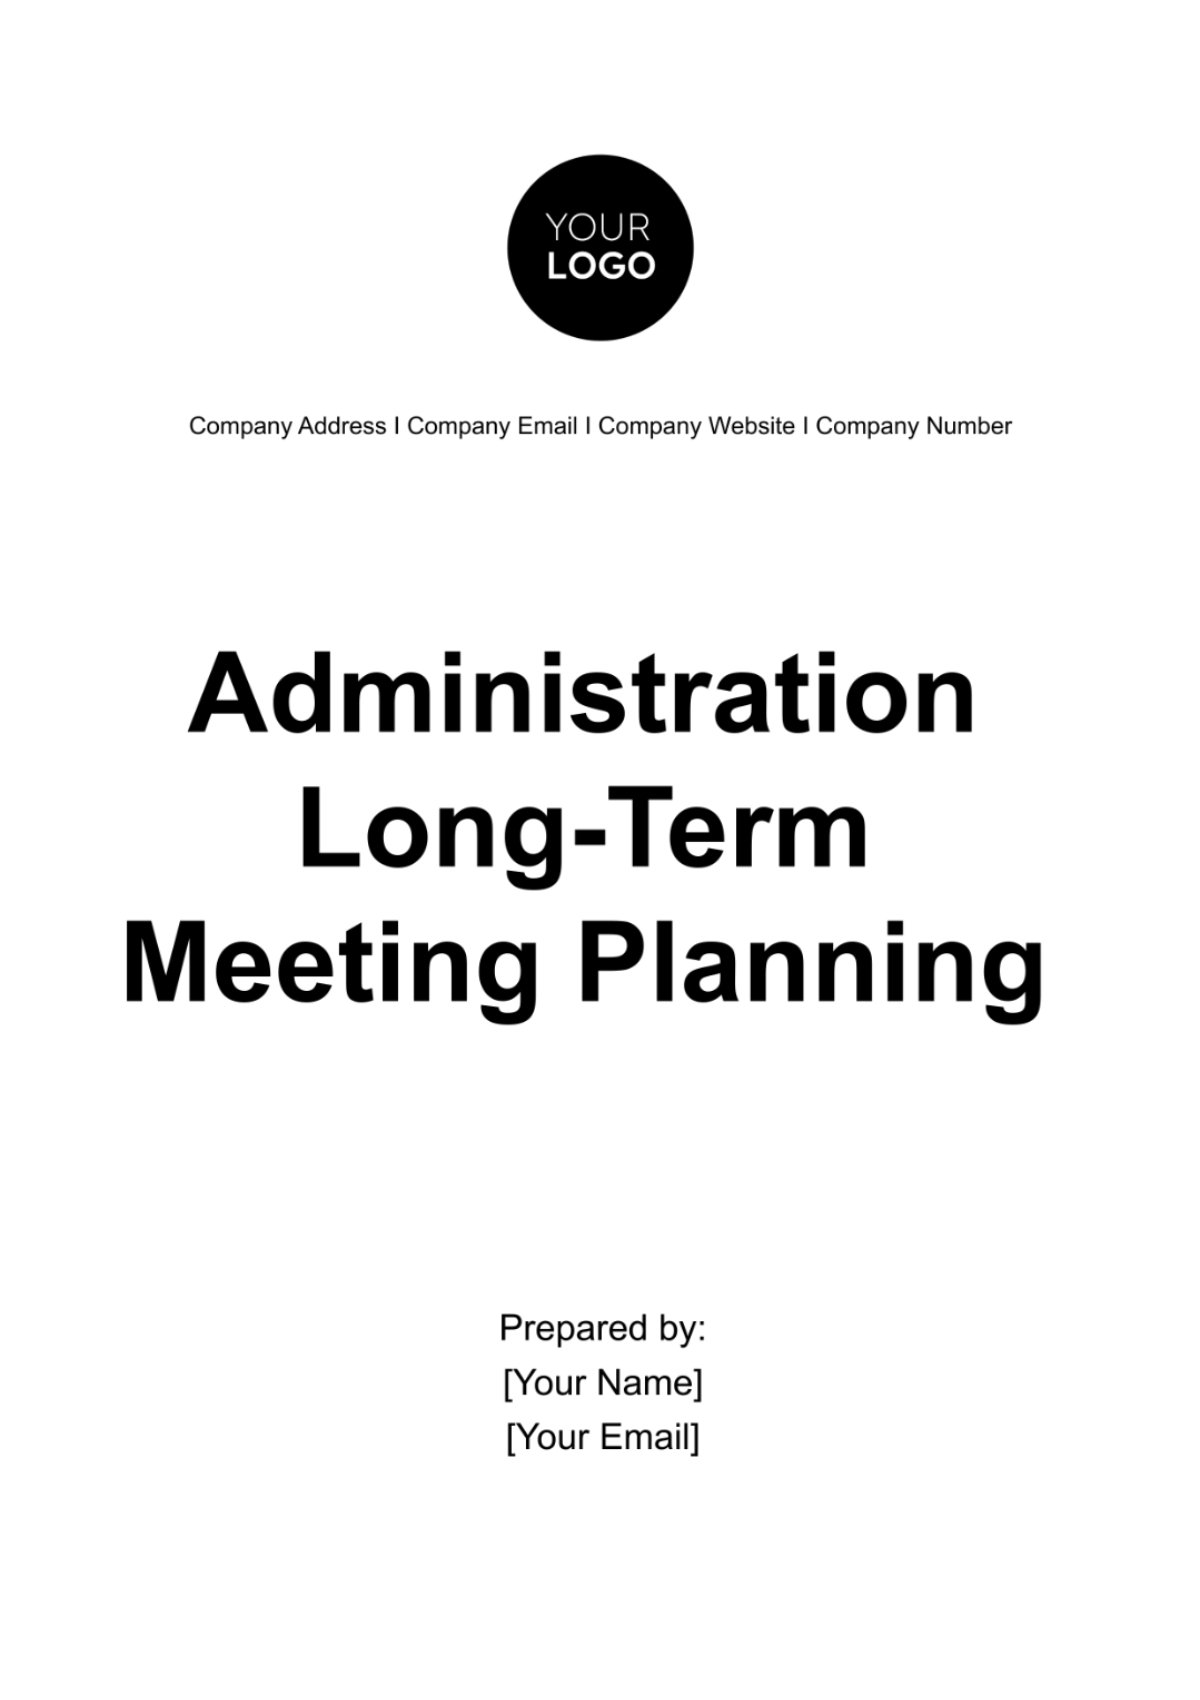 Administration Long-Term Meeting Planning Template